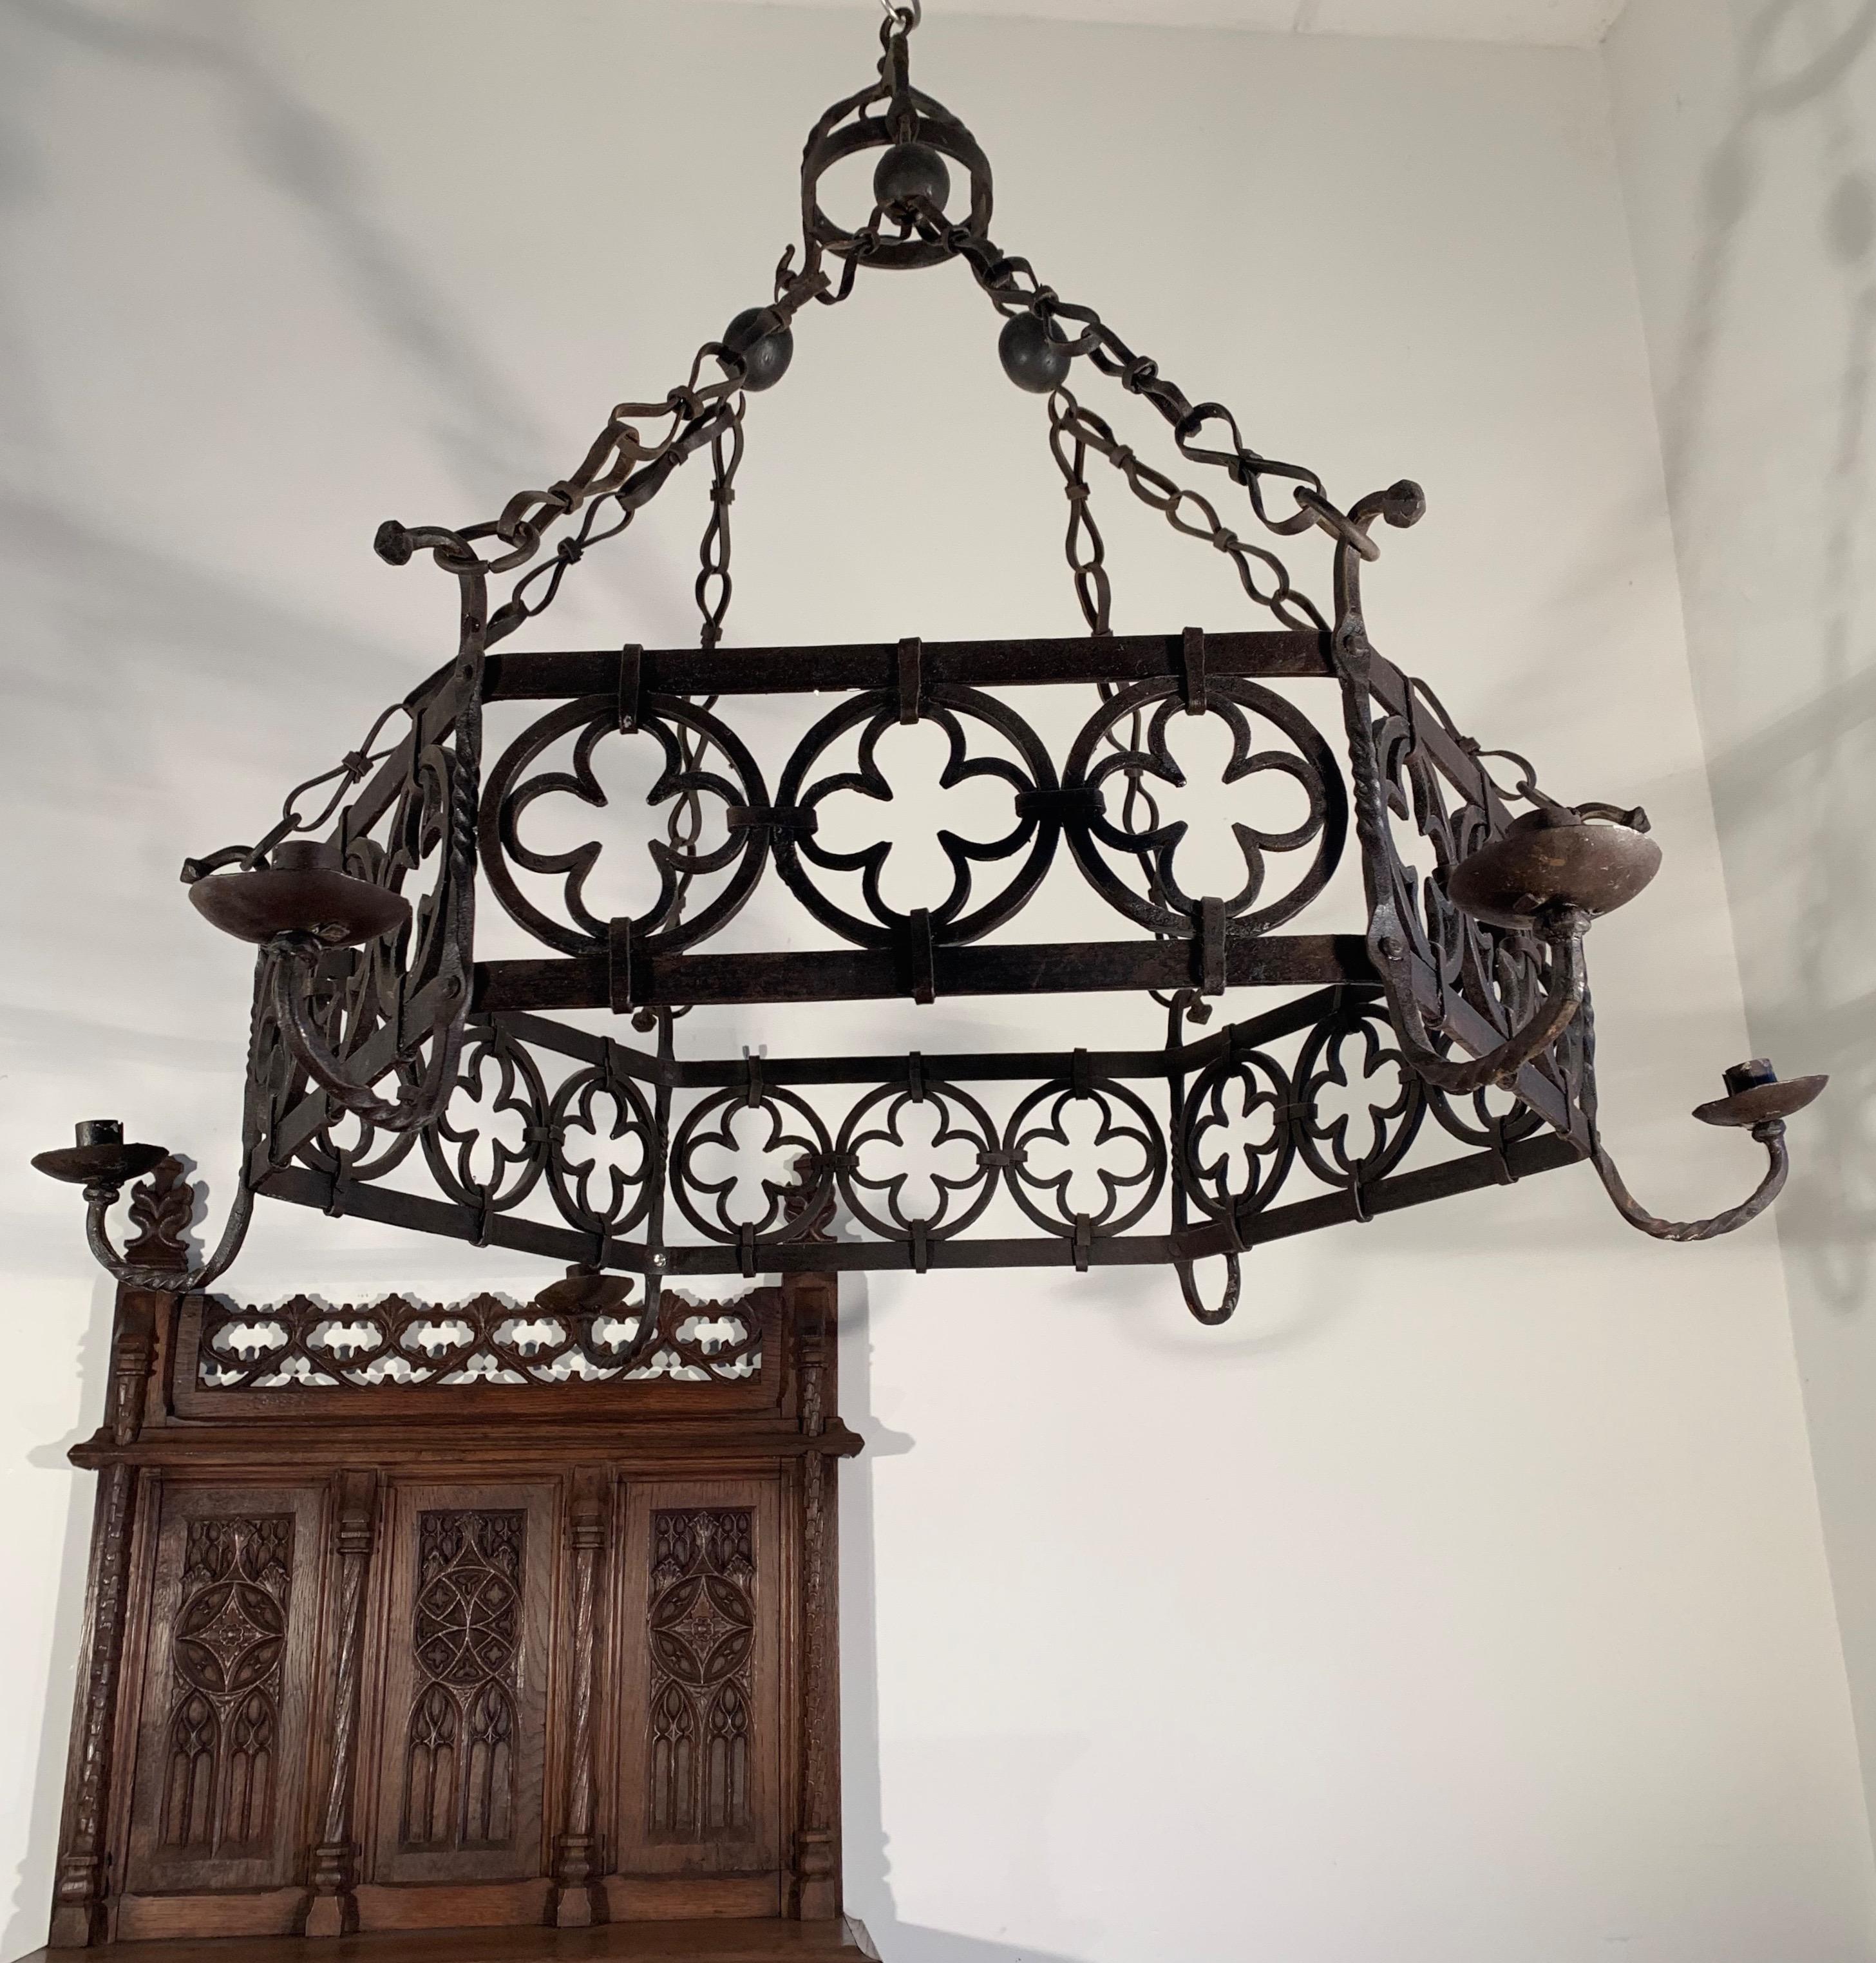 Large Gothic Revival Wrought Iron Chandelier for Dining Room / Restaurant Etc For Sale 6